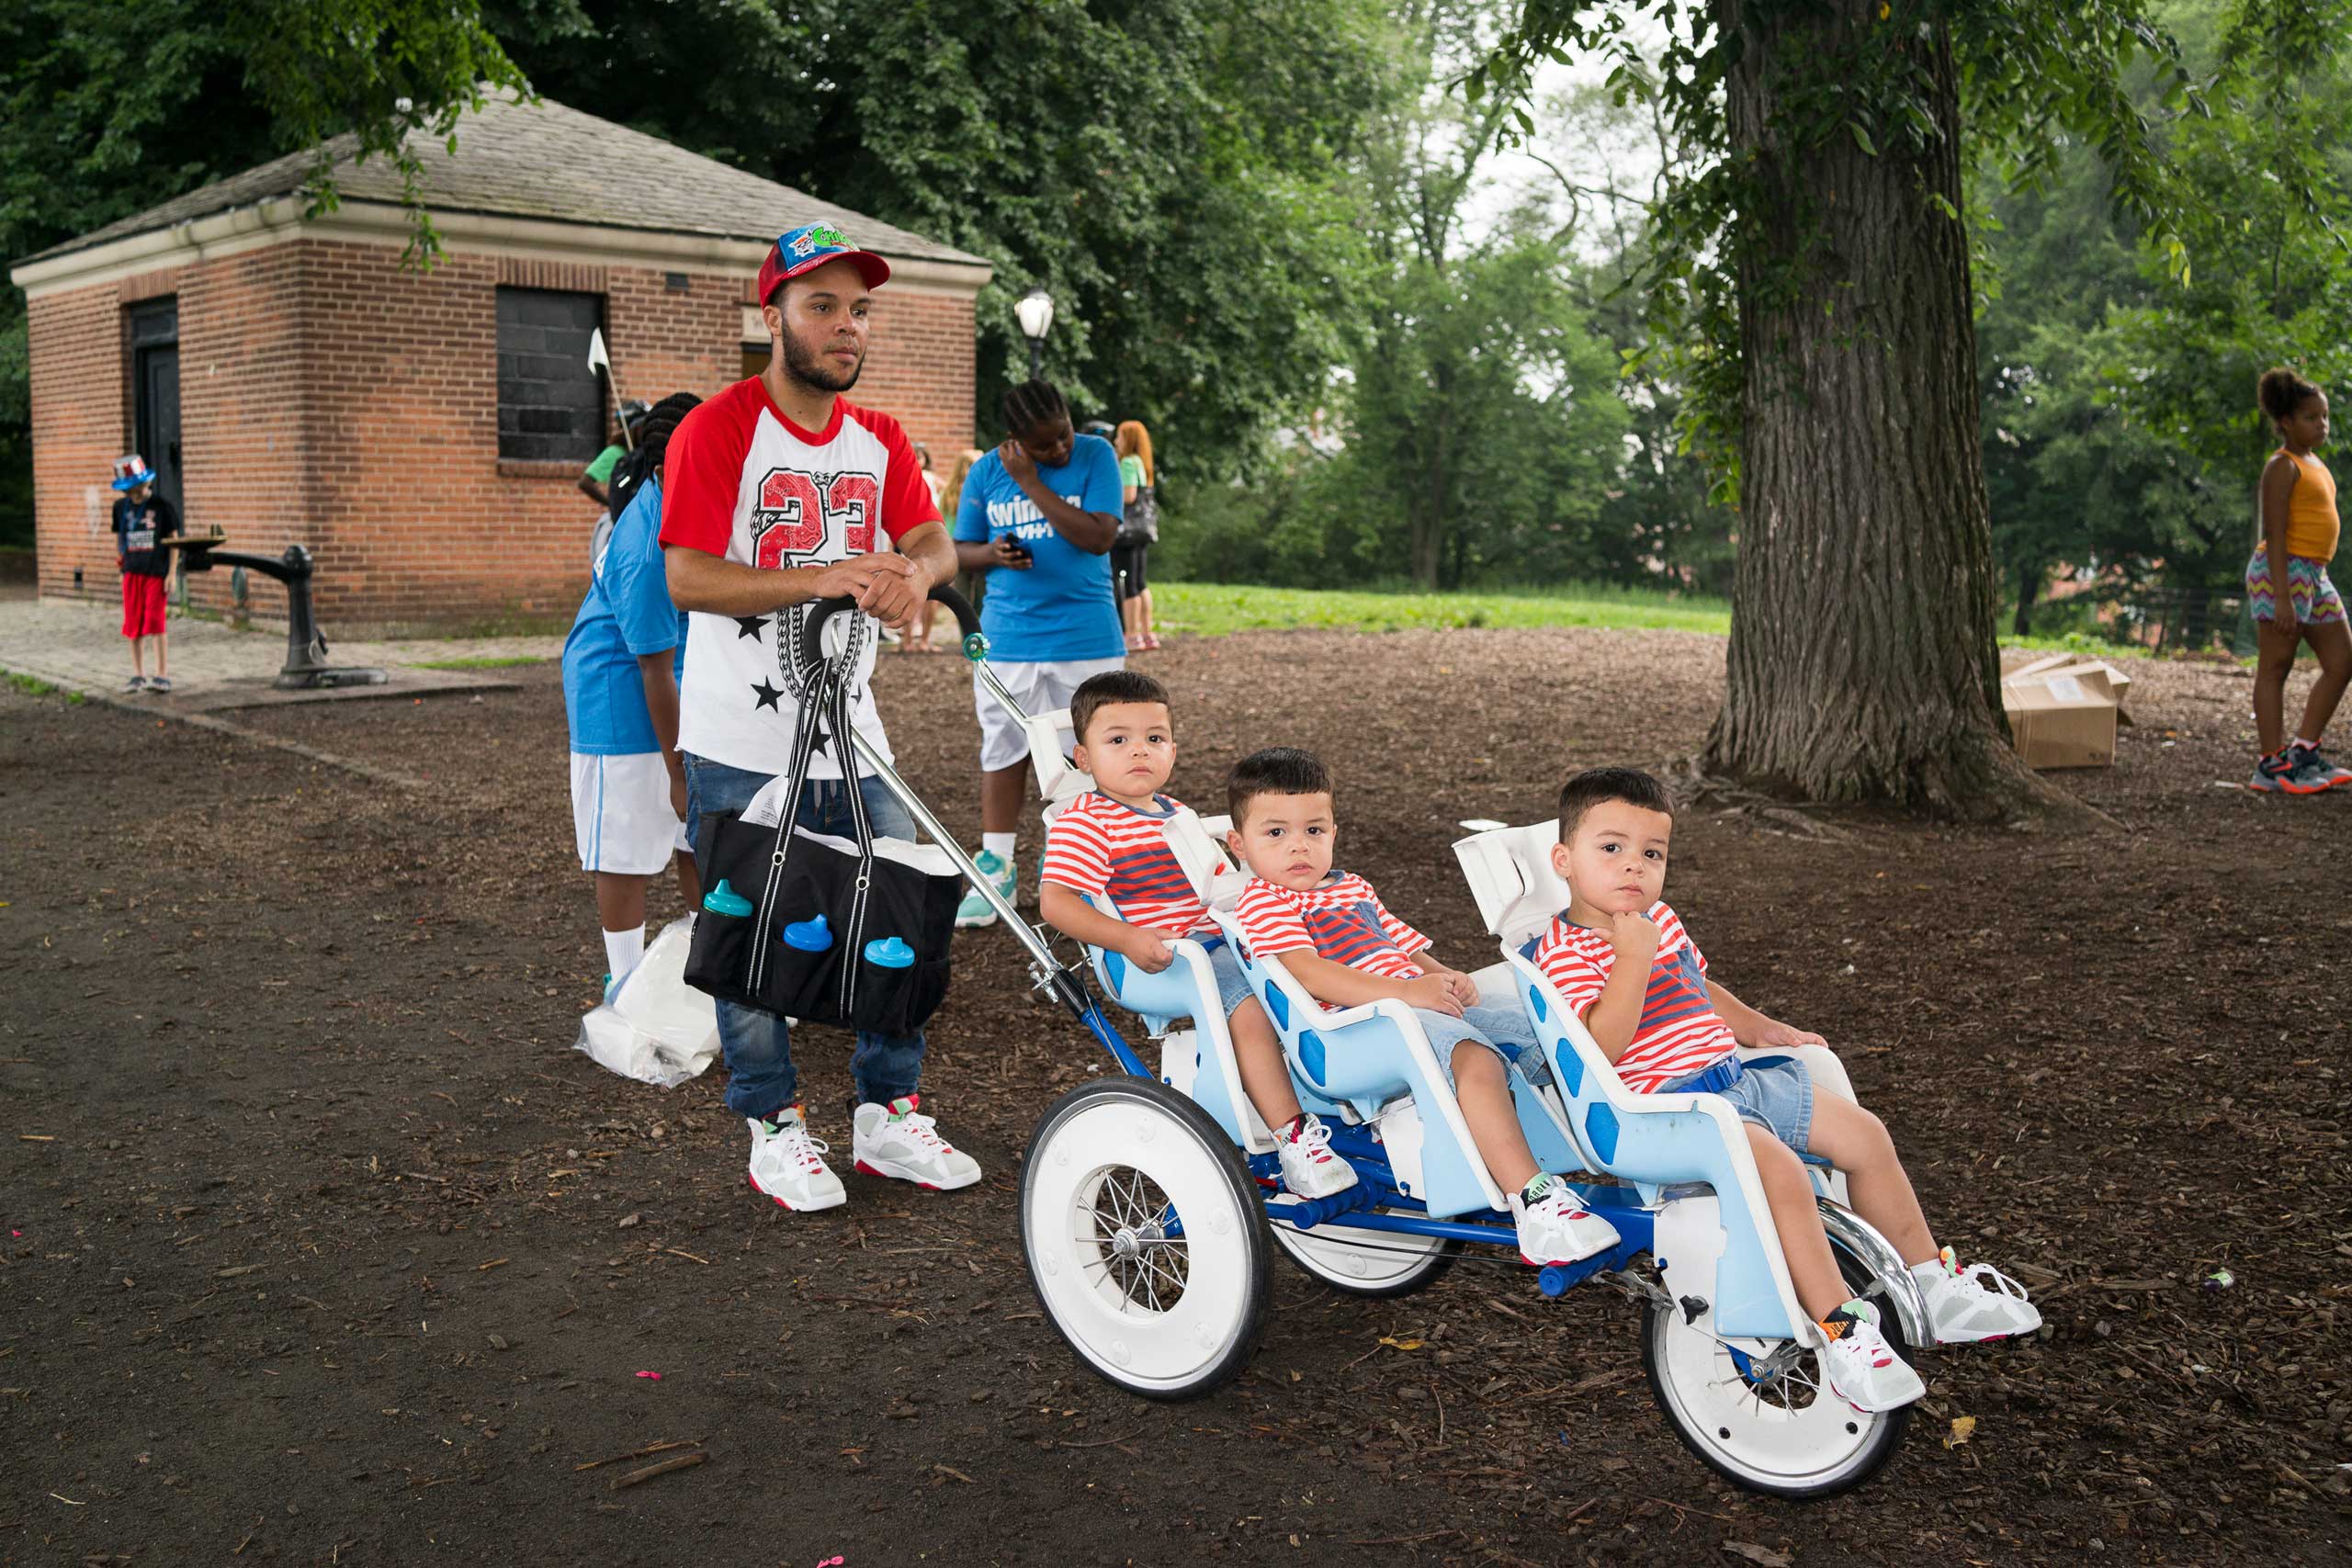 Alex, Aithon, Abraham and Andrick Genao, from Baltimore, gather as hundreds of twins ride tandem bikes in an attempt to set the record for the most twins ever riding tandem bikes, in Central Park in New York City on July 15, 2015.